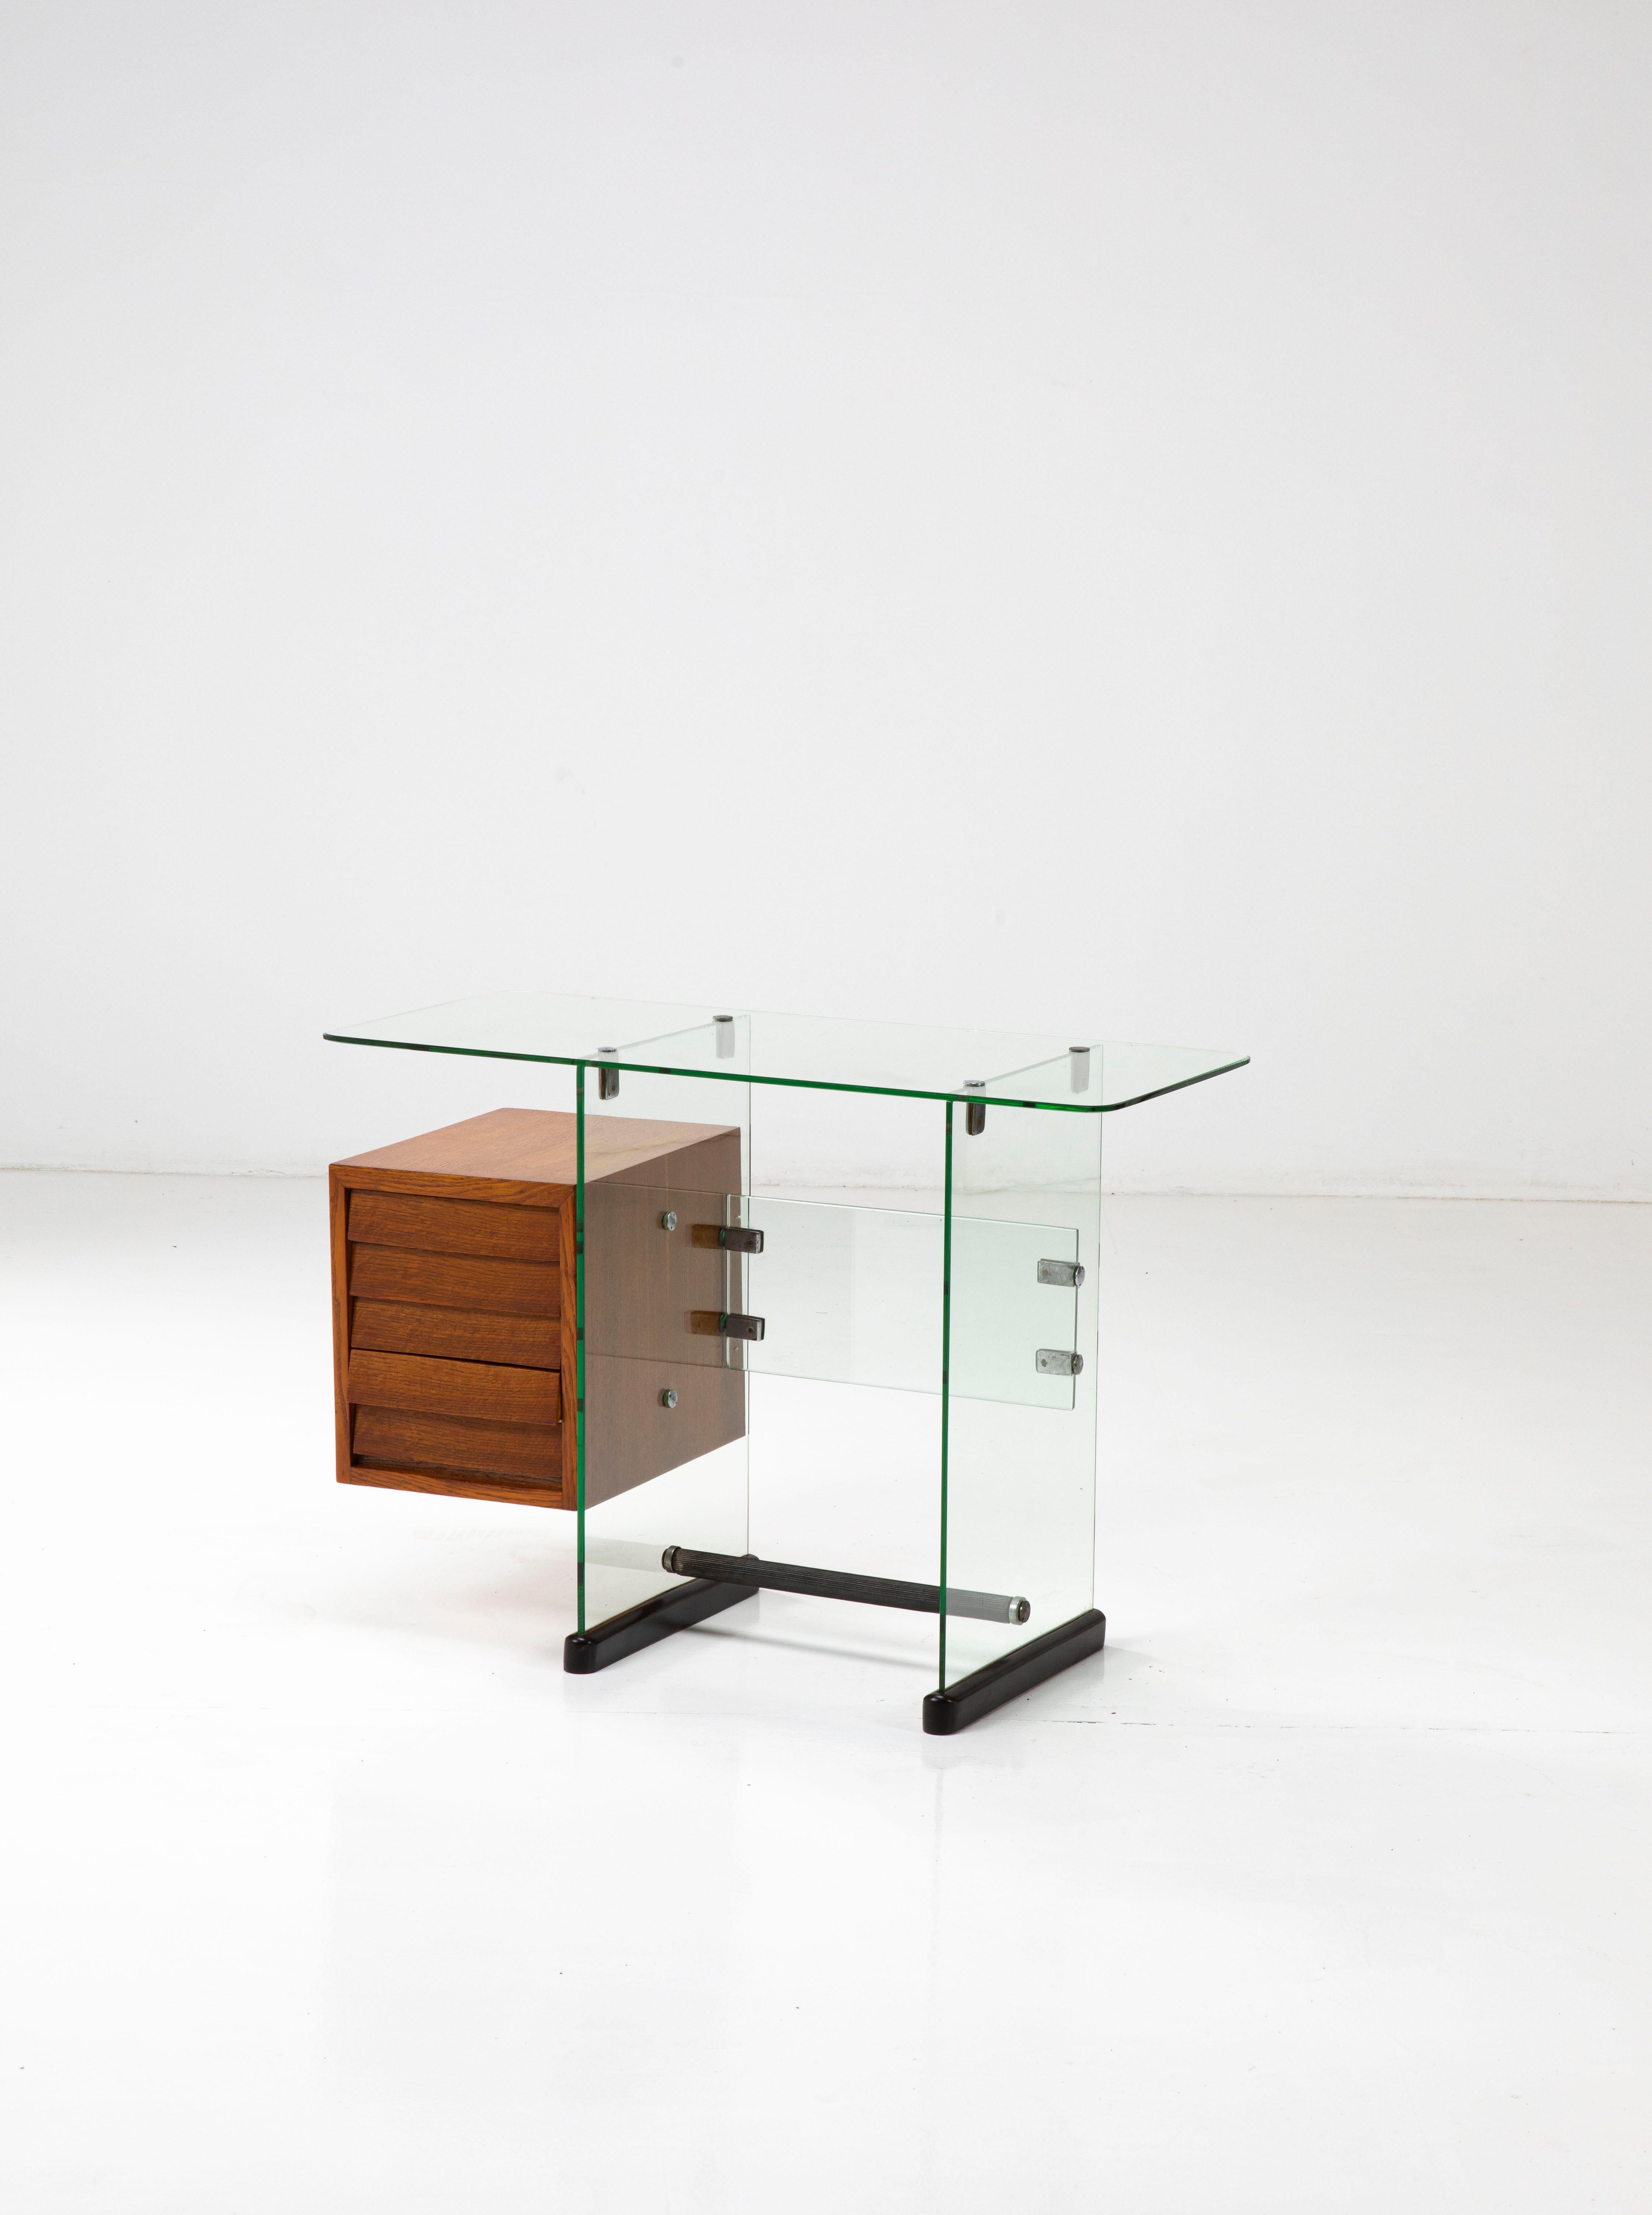 This elegant small desk is made of toughened glass panes joined by brass and metal junctions and with a wood chest of drawers, just as the two bases are made of wood. 

The design of this piece is related to other office furniture created for